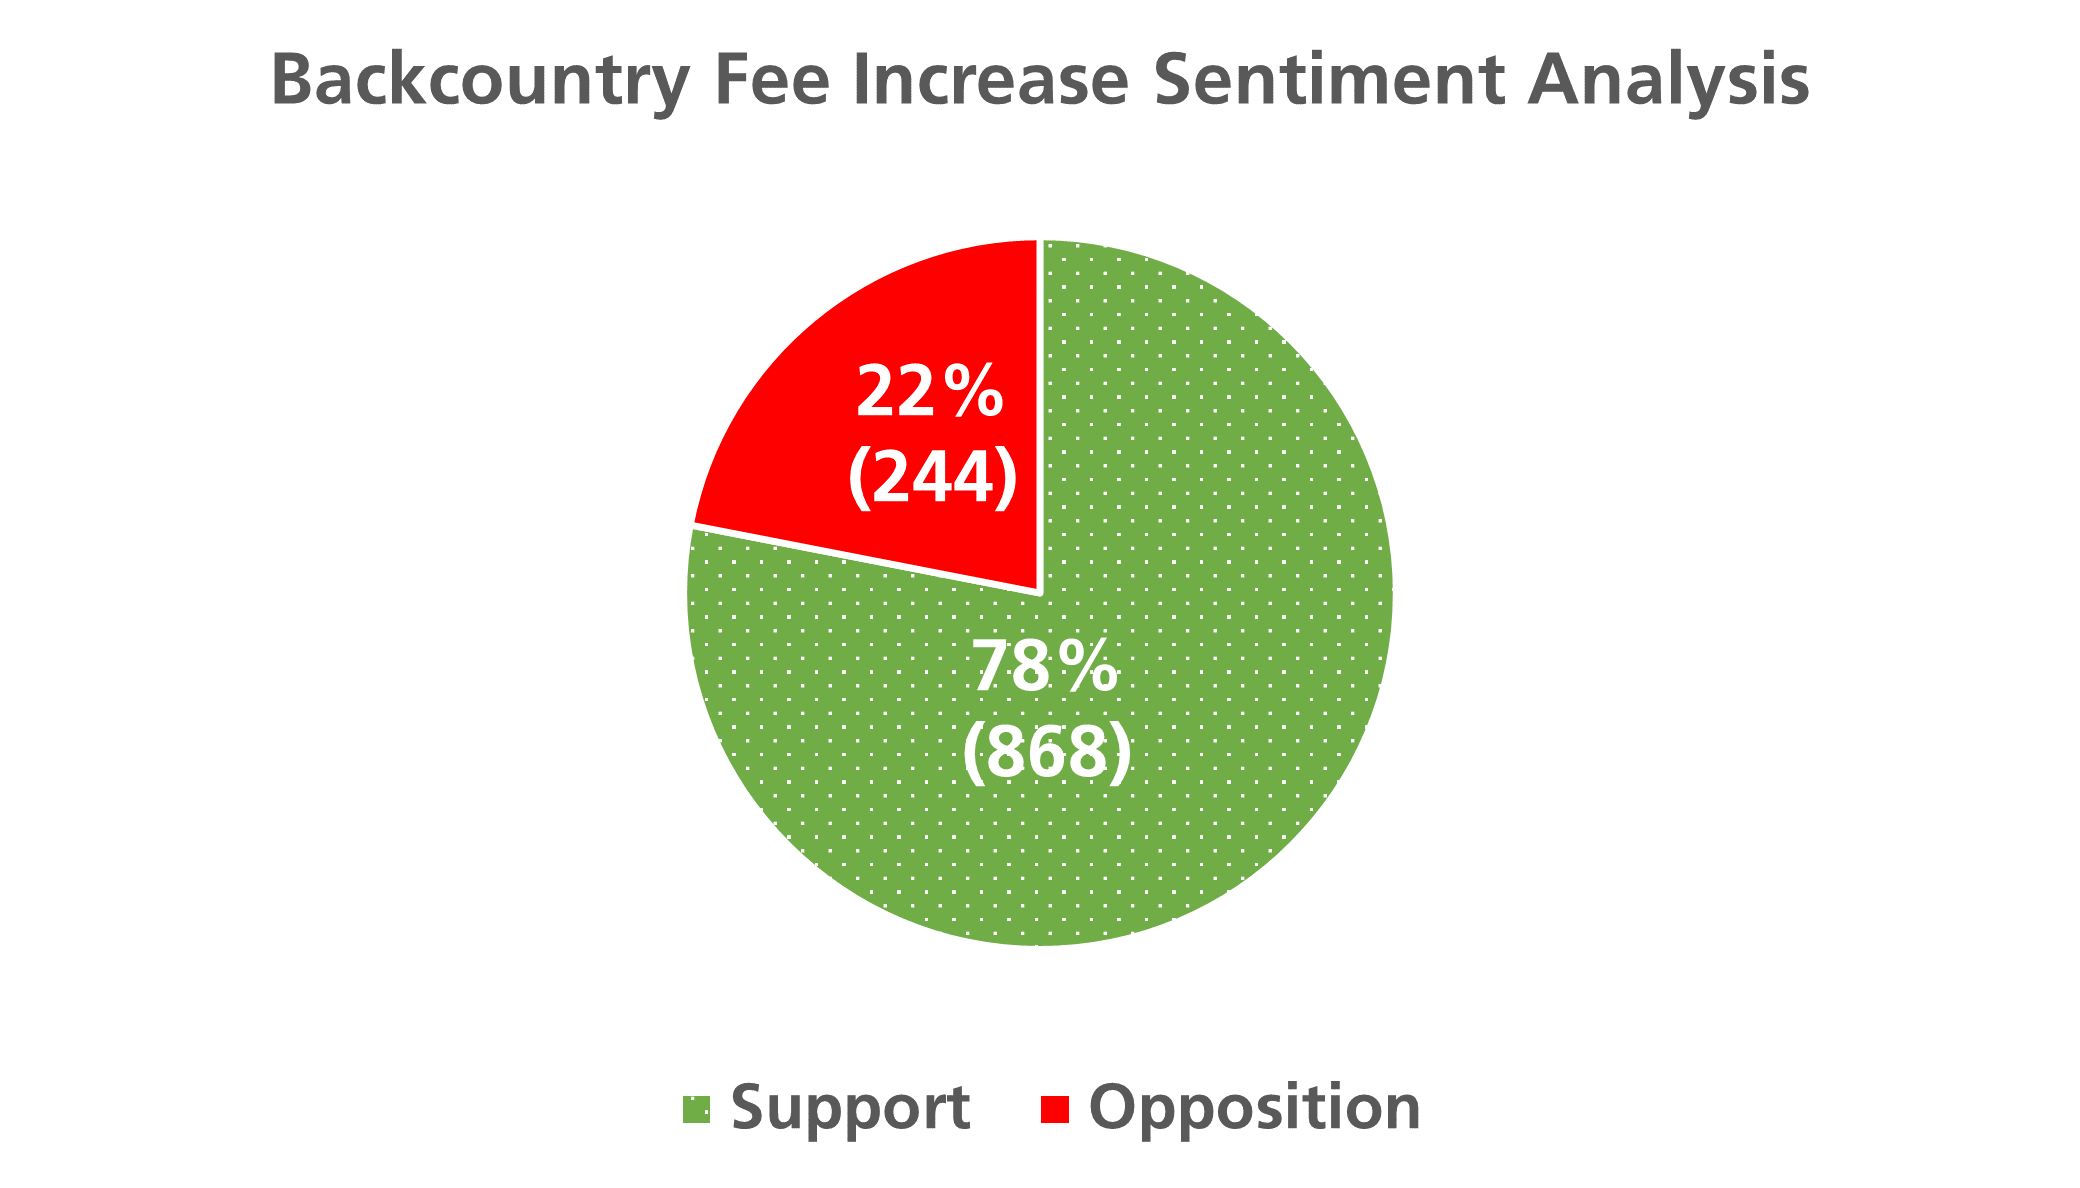 pie chart of sentiment analysis for backcountry fee increase